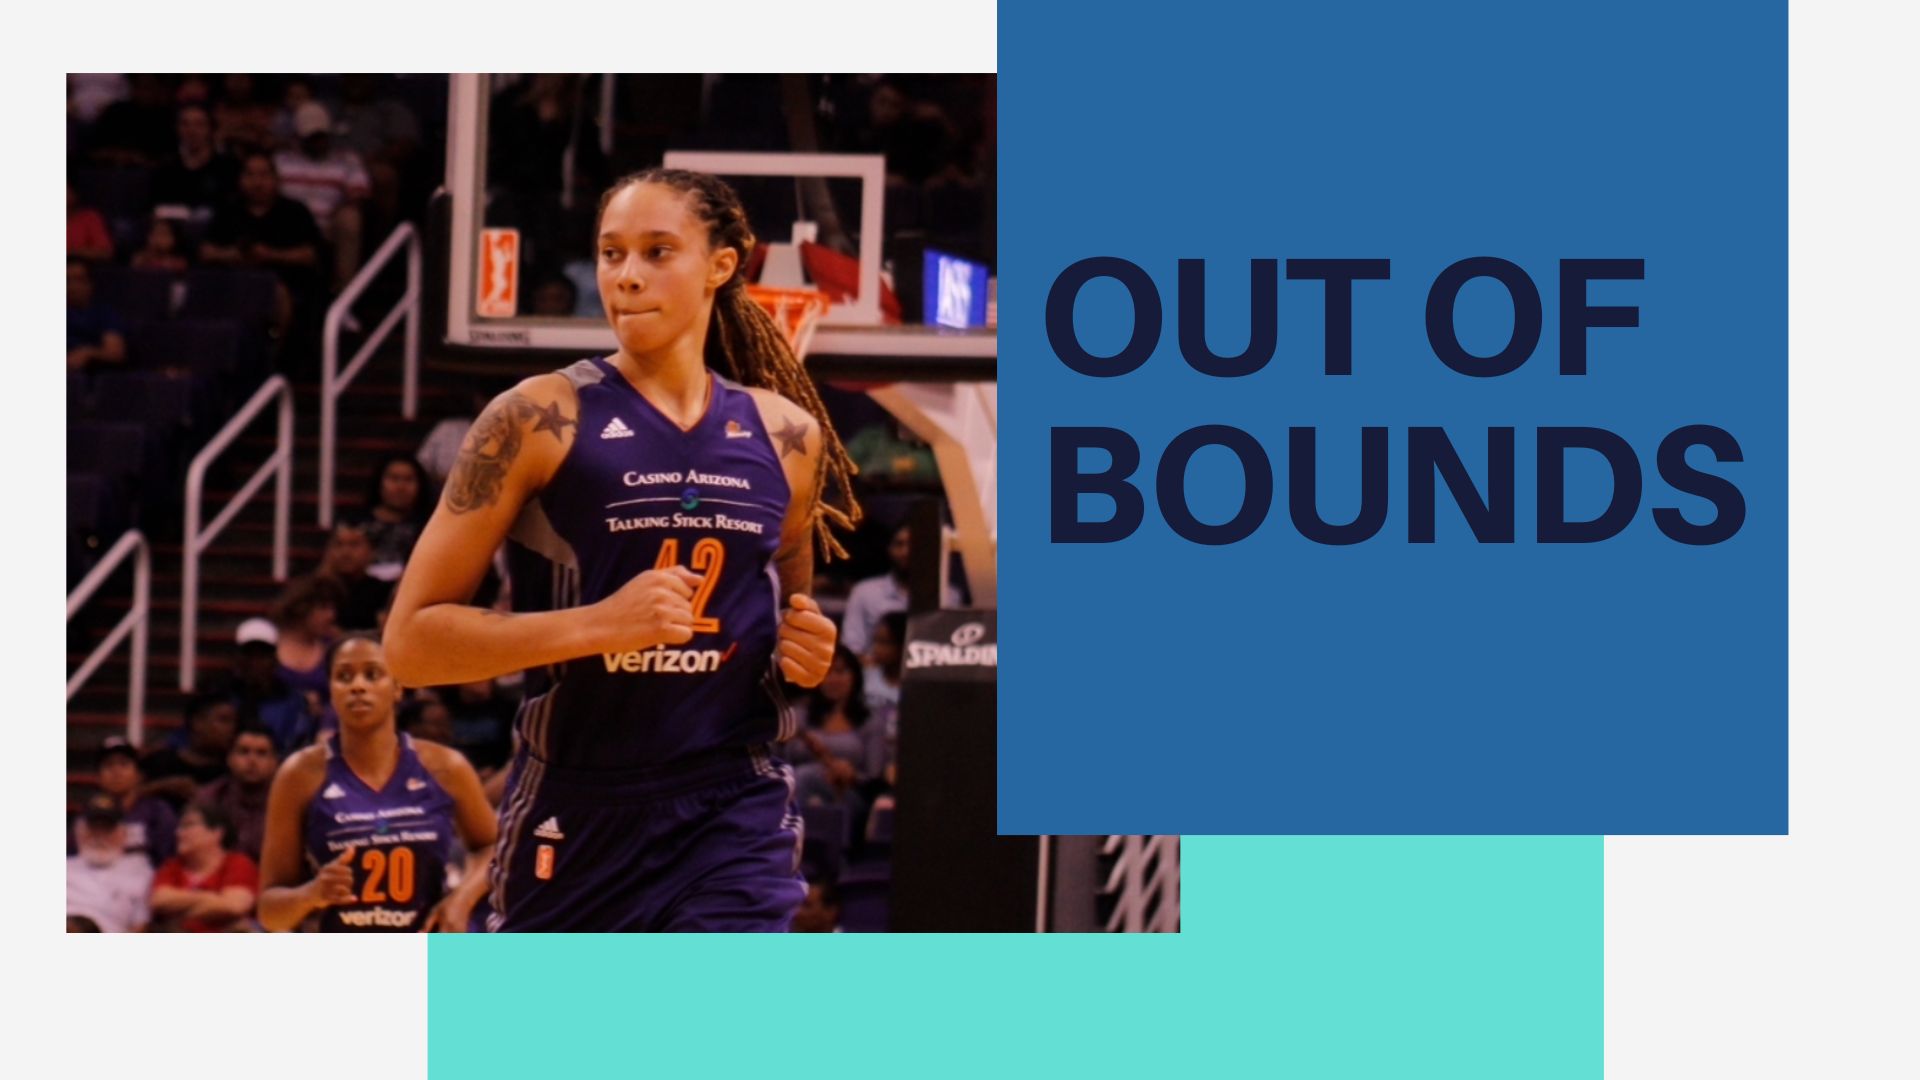 Sports roundup: NFL Week 4, MLB, and Kim Mulkey's silence on Brittney Griner